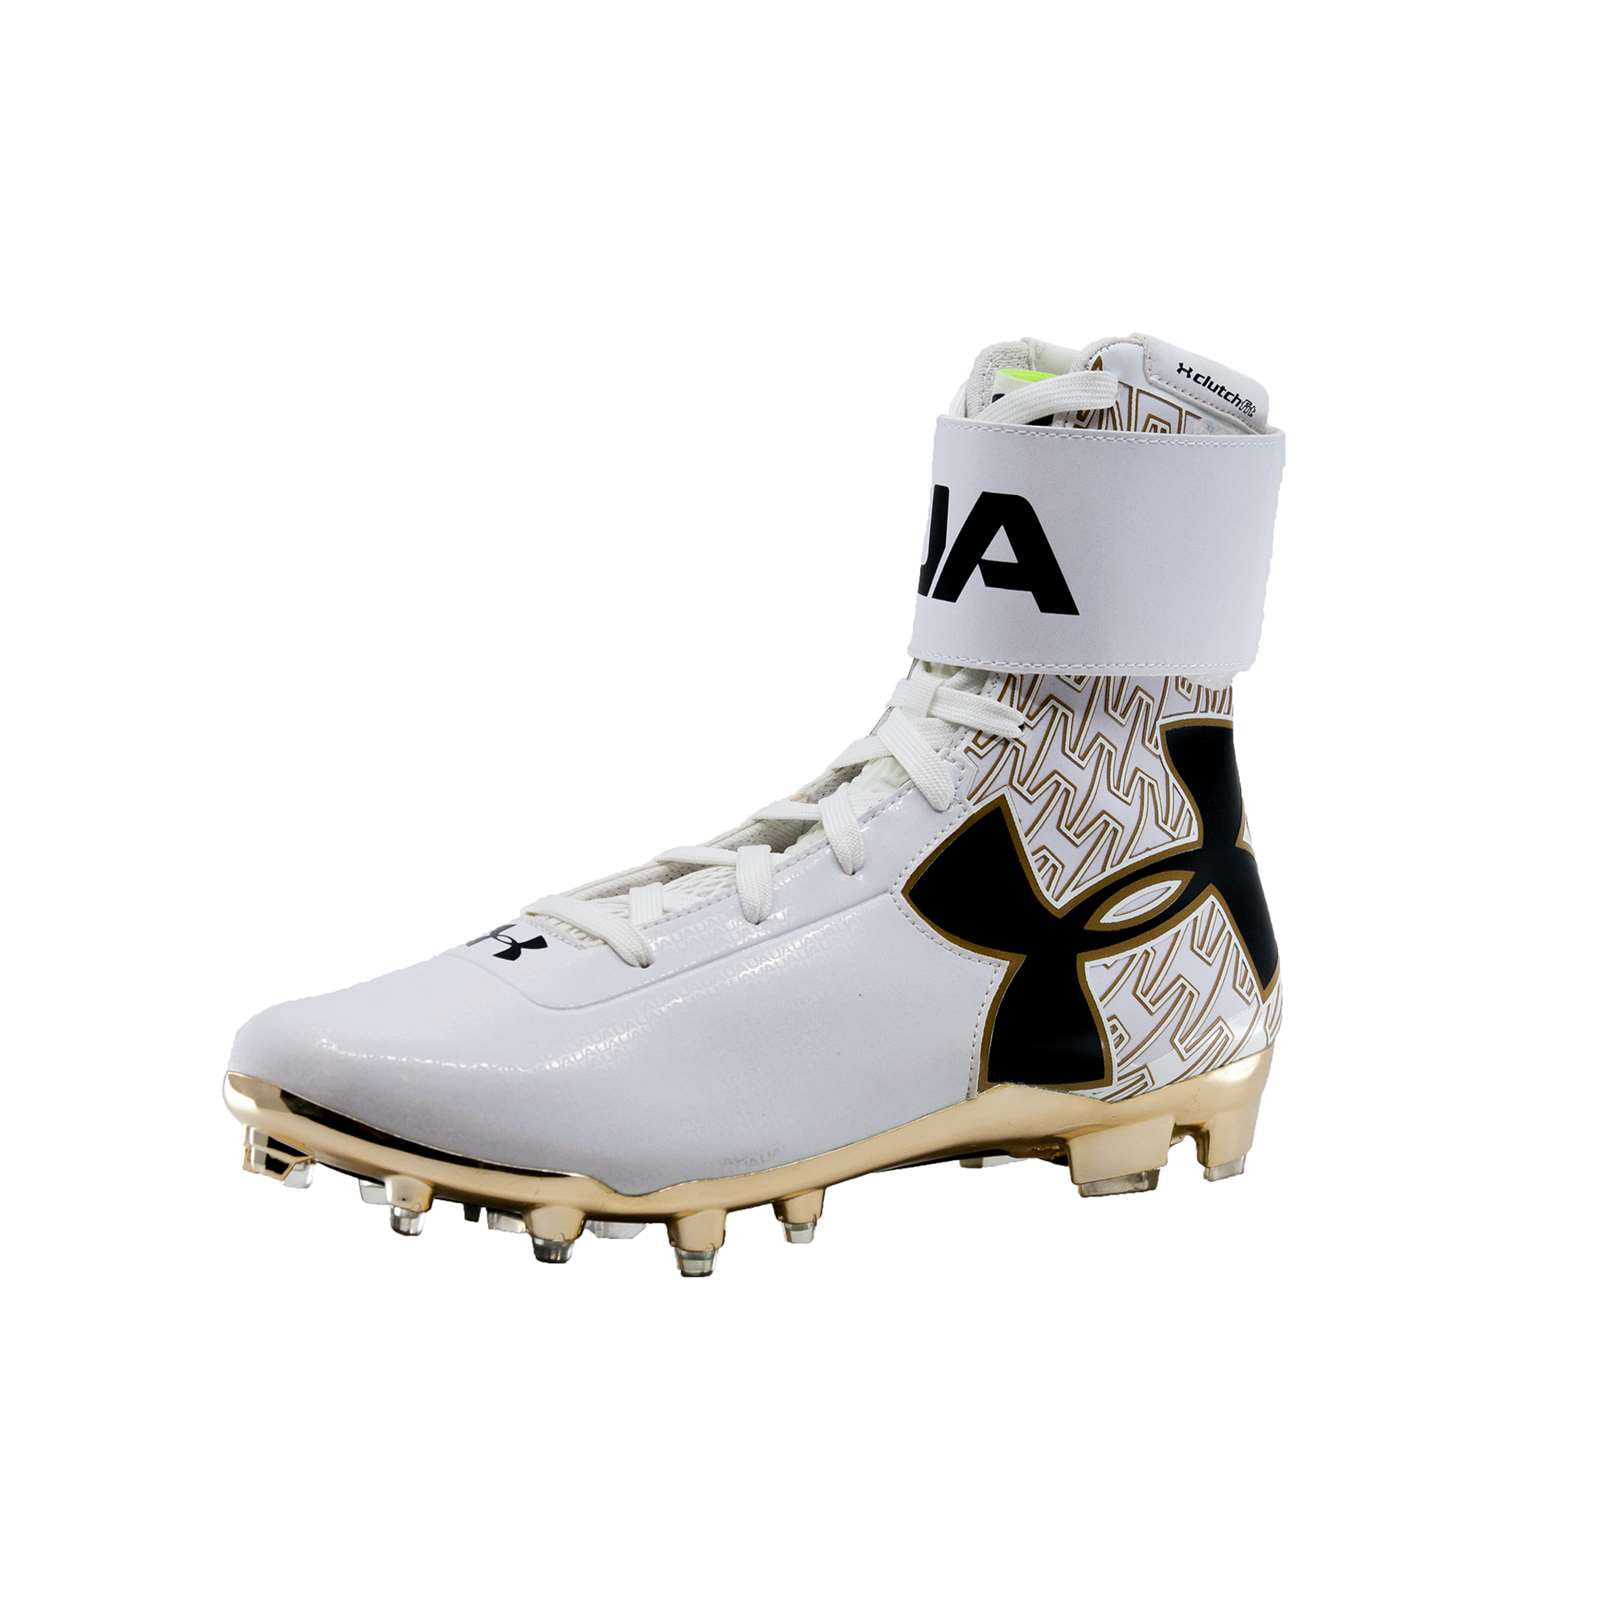 c1n cleats customize